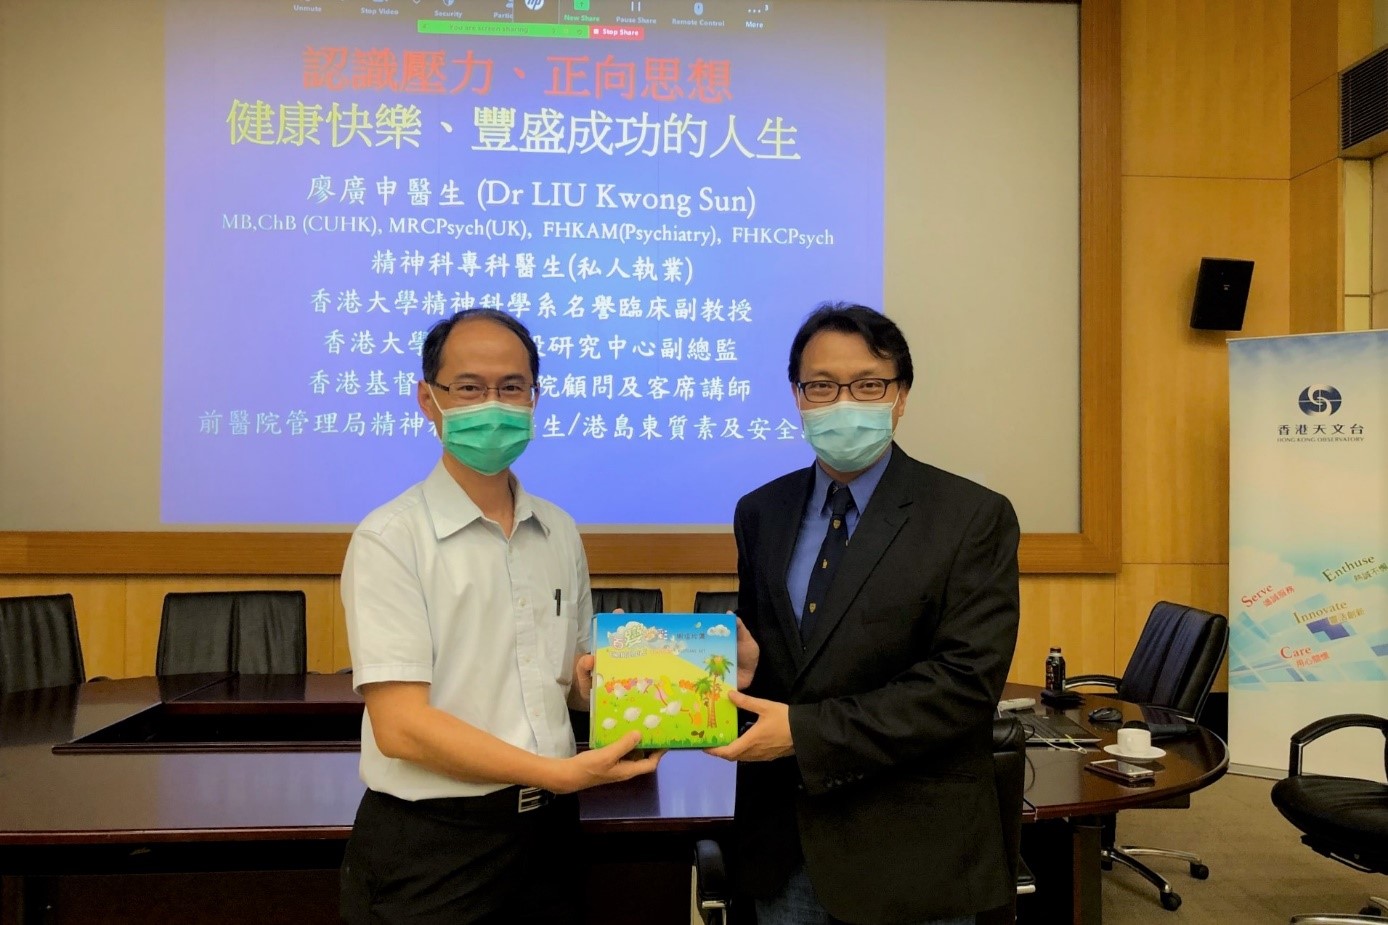 Dr Liu Kwong-sun introduced stress management and positive thinking to colleagues of the Observatory (24 July)